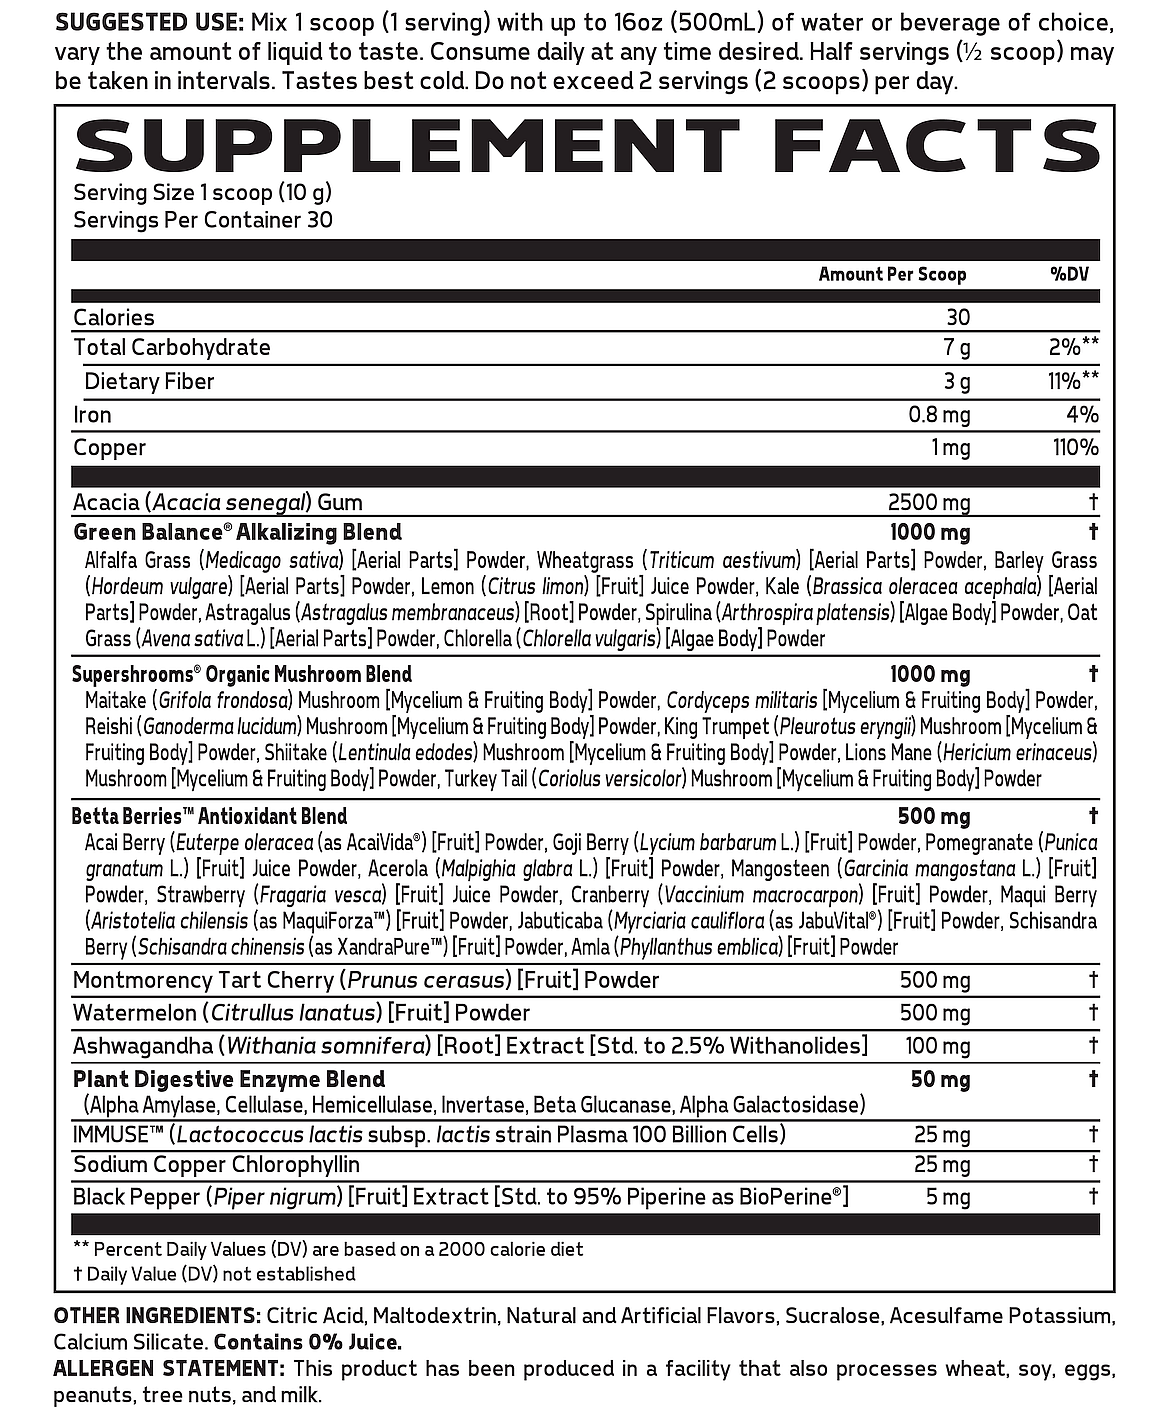 Supplement with diverse ingredients such as Acacia, Green Balance Alkalizing Blend, and Supershrooms Blend. Advised 1-2 scoops daily with water.